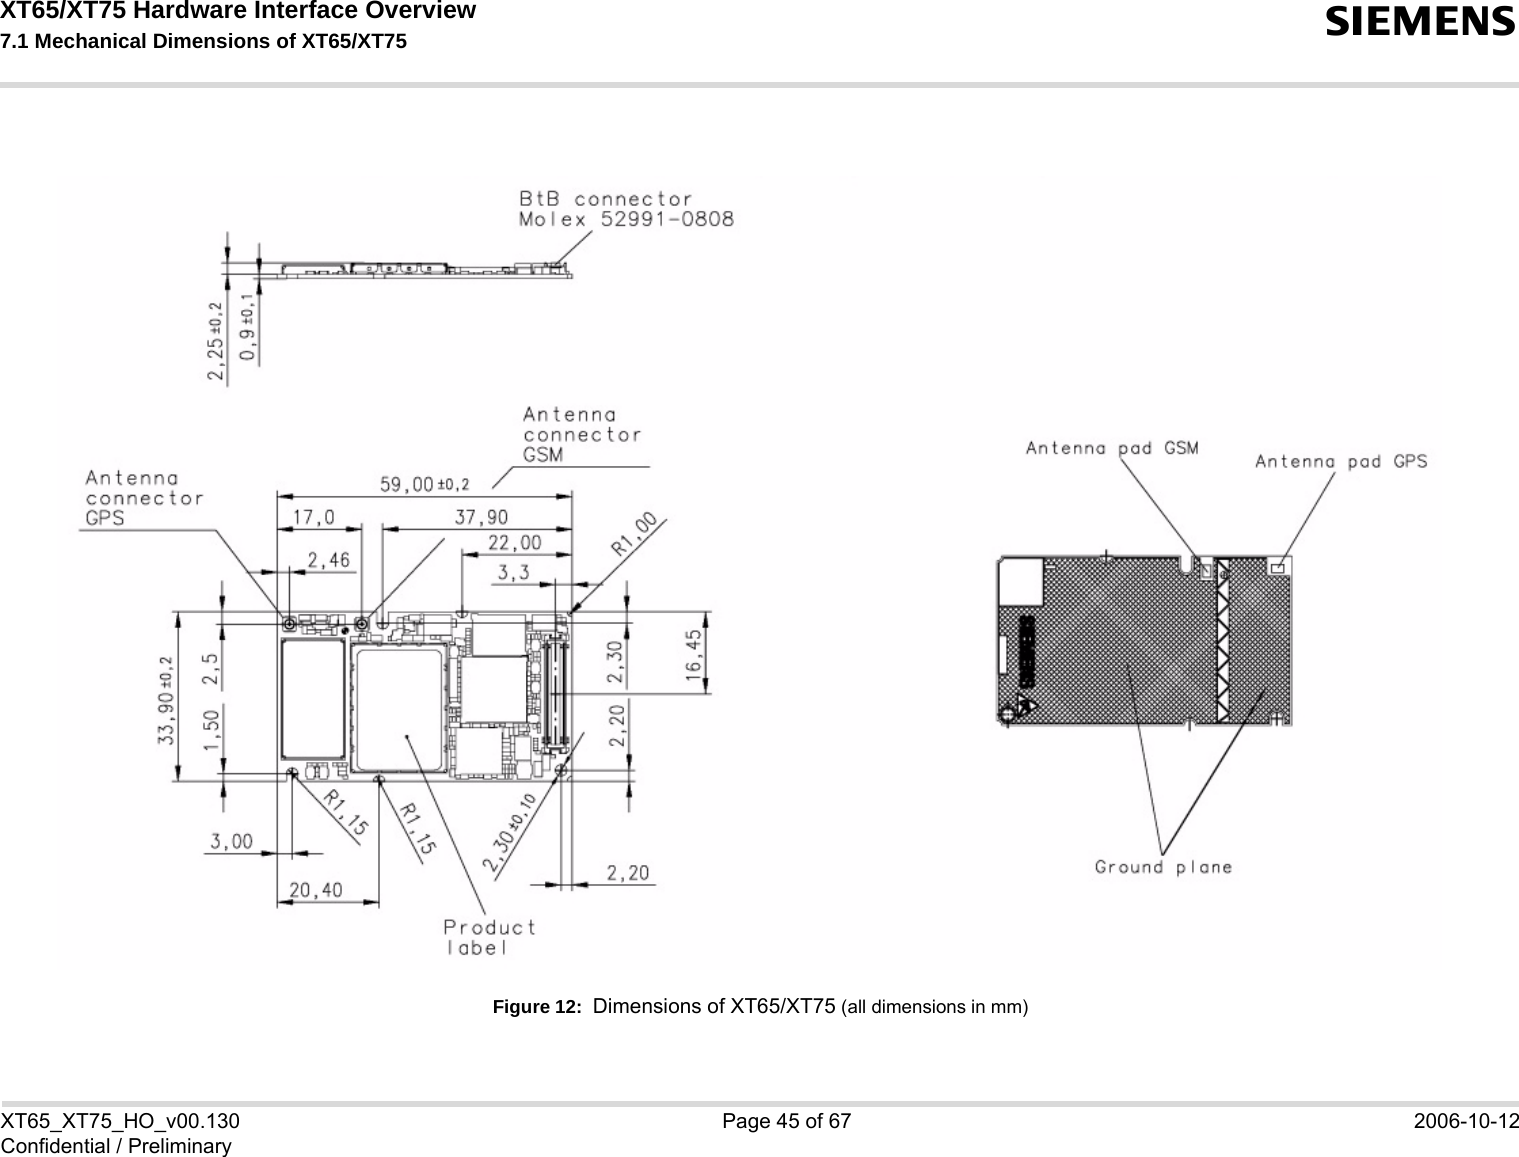 XT65/XT75 Hardware Interface Overview 7.1 Mechanical Dimensions of XT65/XT75 sXT65_XT75_HO_v00.130 Page 45 of 67 2006-10-12Confidential / PreliminaryFigure 12:  Dimensions of XT65/XT75 (all dimensions in mm)